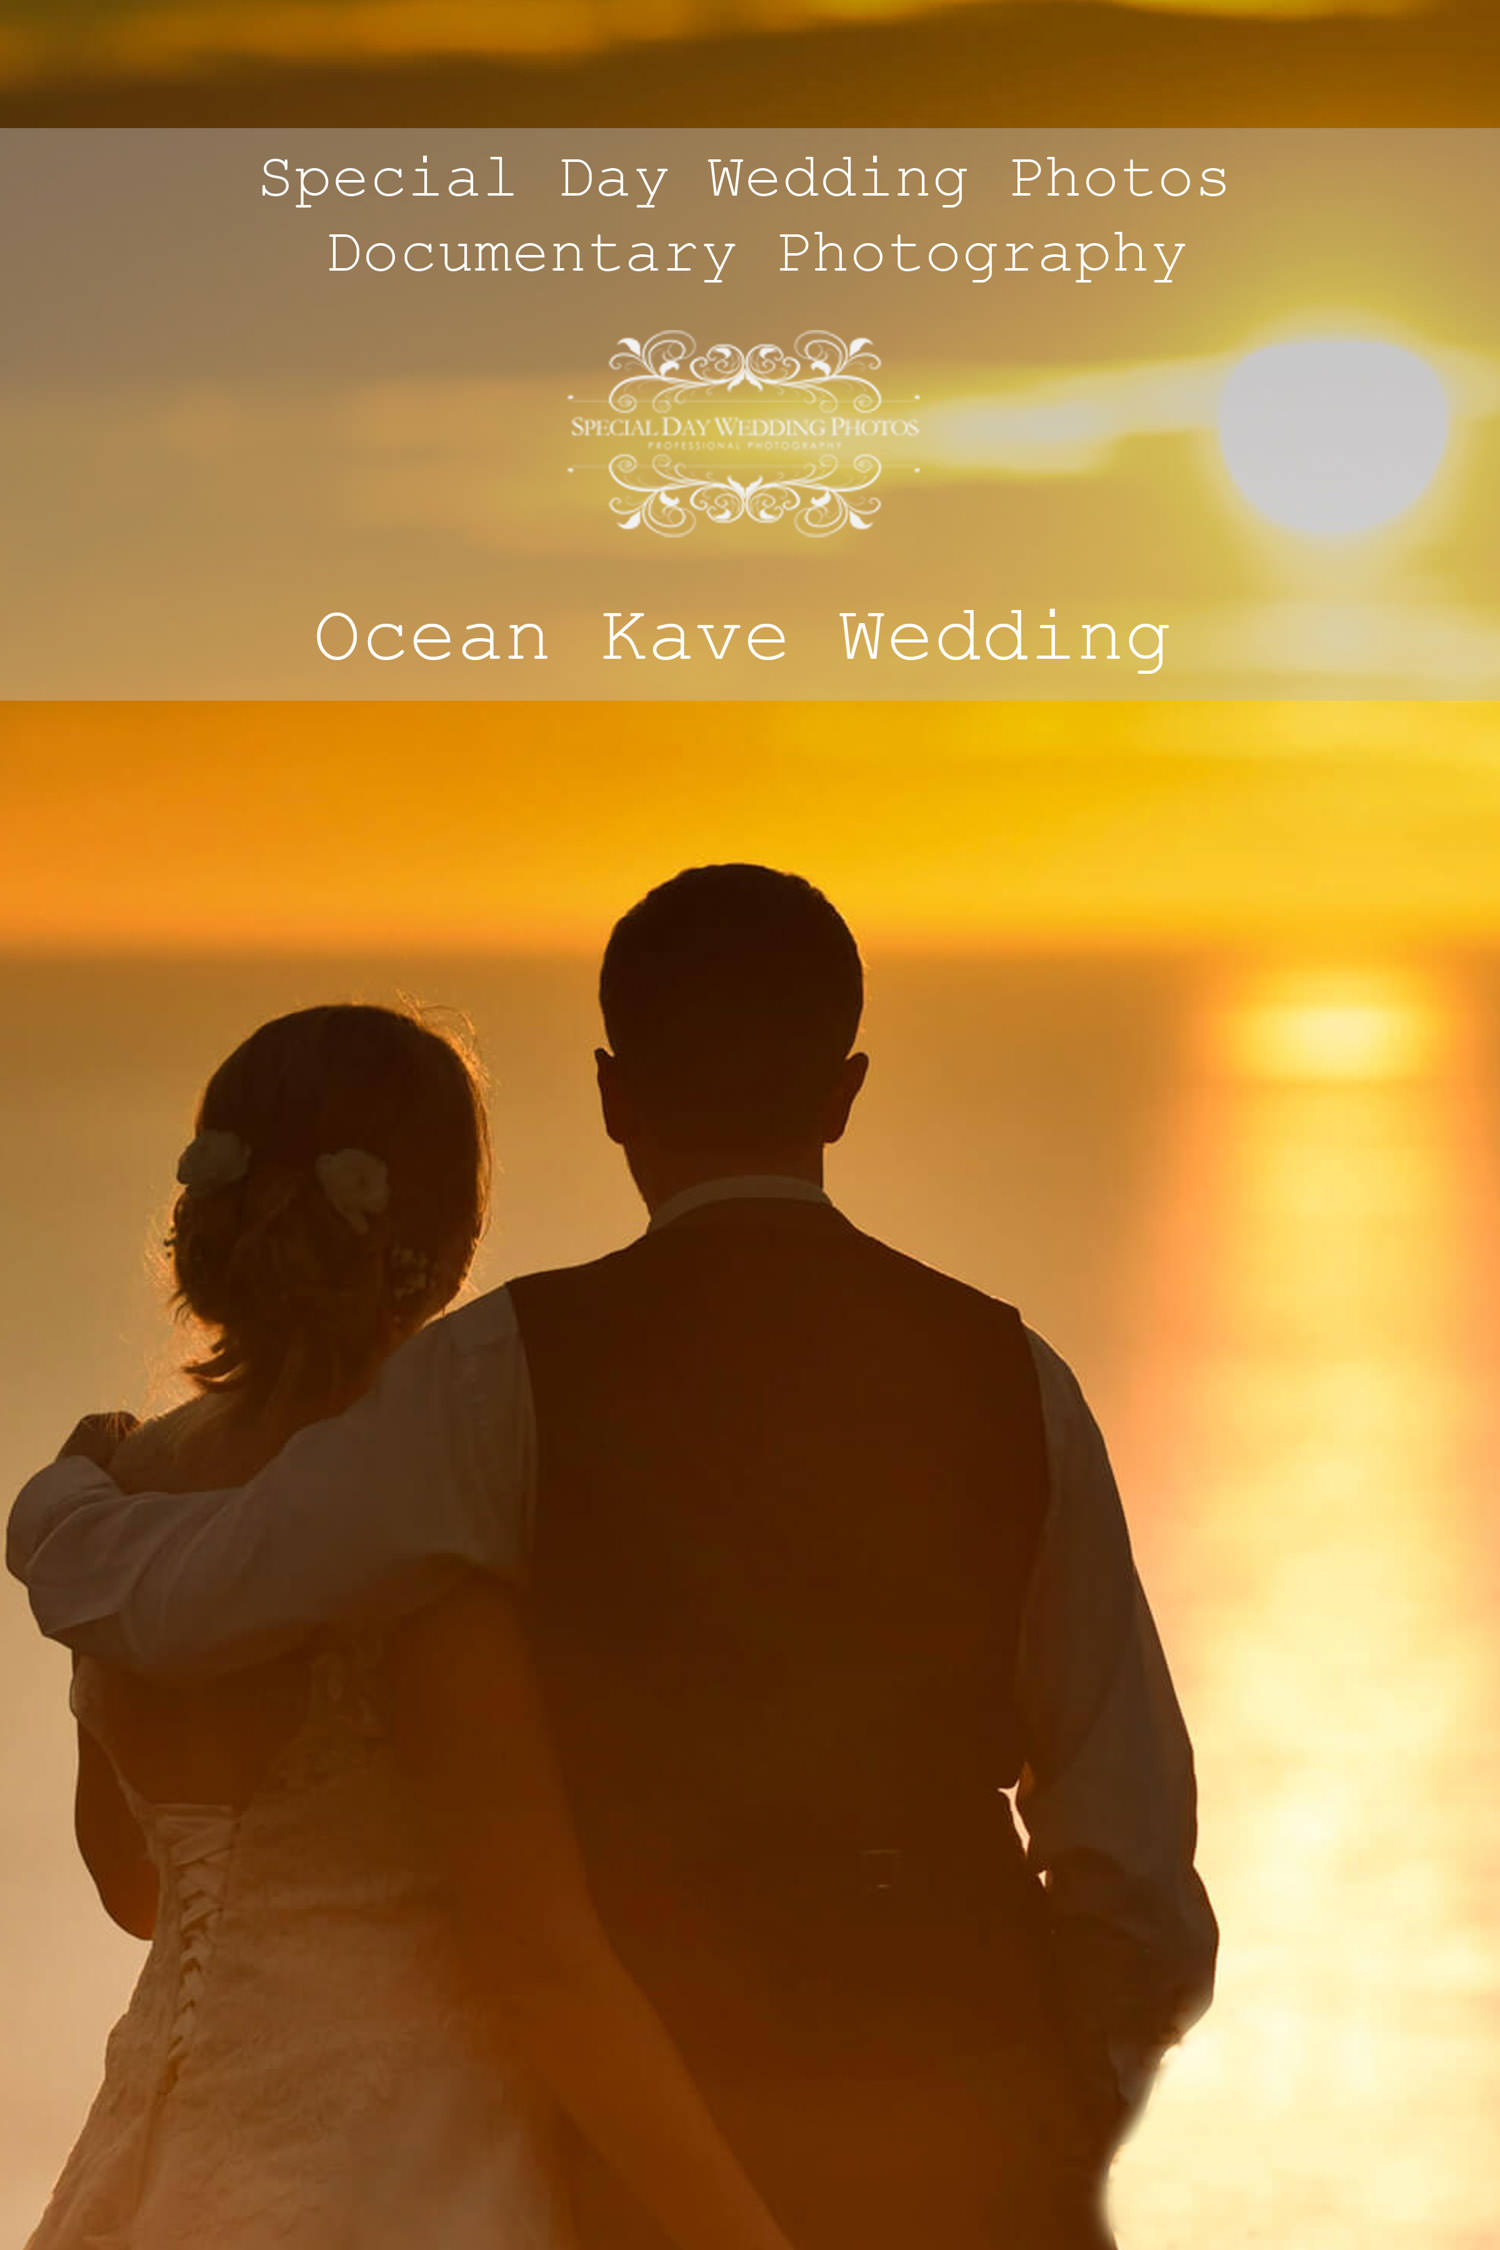 Ocean Kave in Westward Ho! North Devon. A beautiful venue with stunning sunsets.